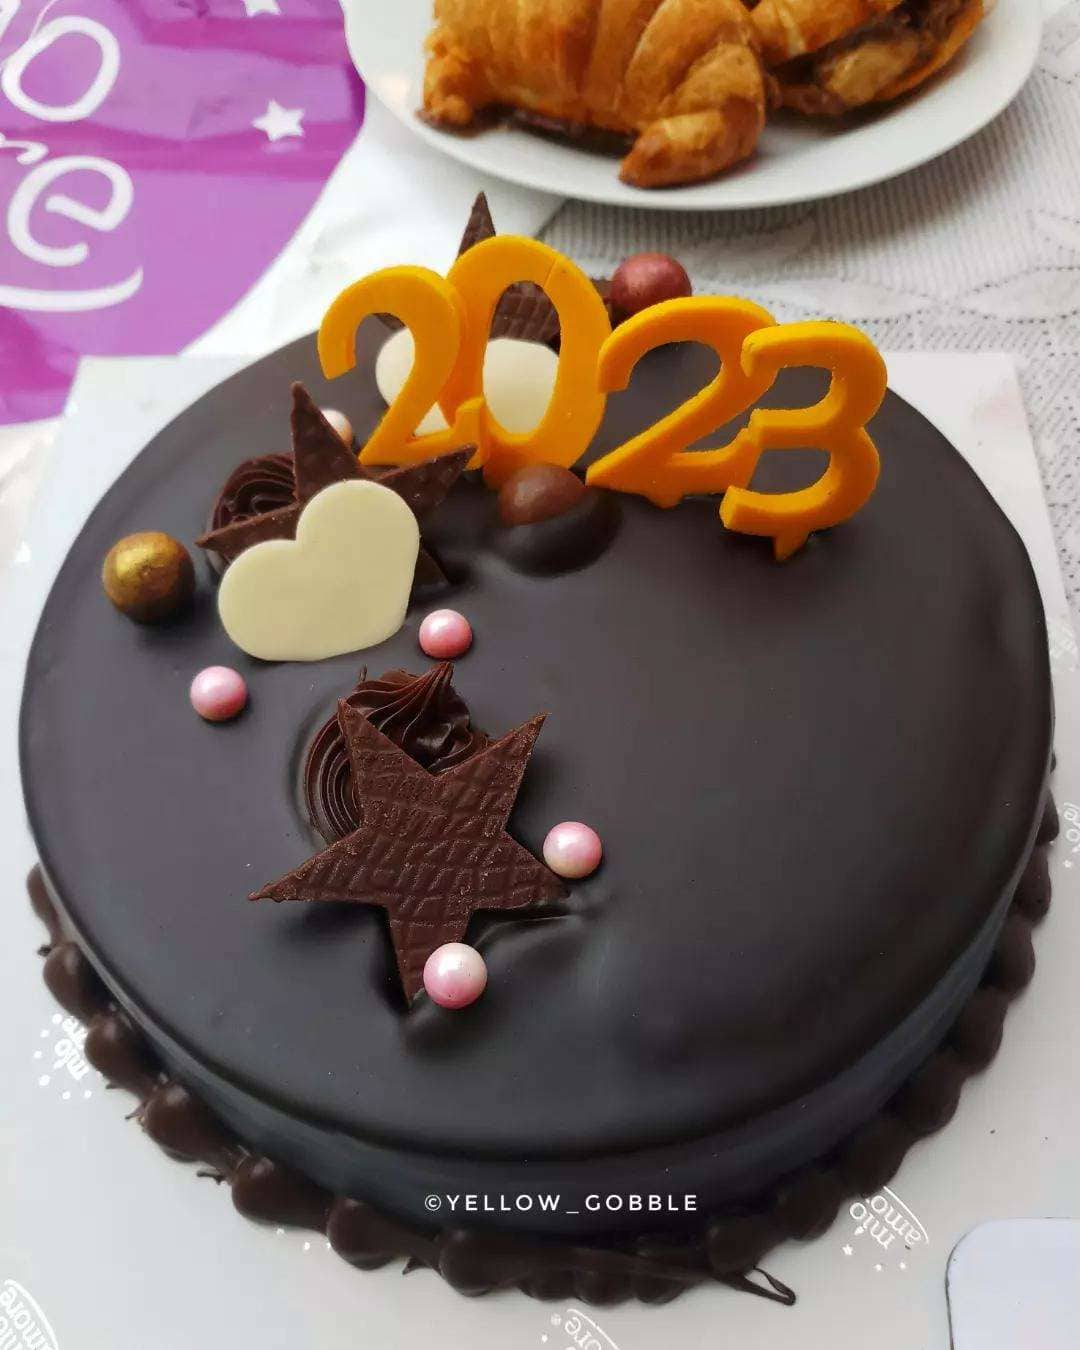 mio-amore-the-cake-shop-merry-christmas-and-happy-new-year-sale-ad-times-of-india-kolkata.  Check o… | Cake shop, Merry christmas and happy new year, Merry christmas